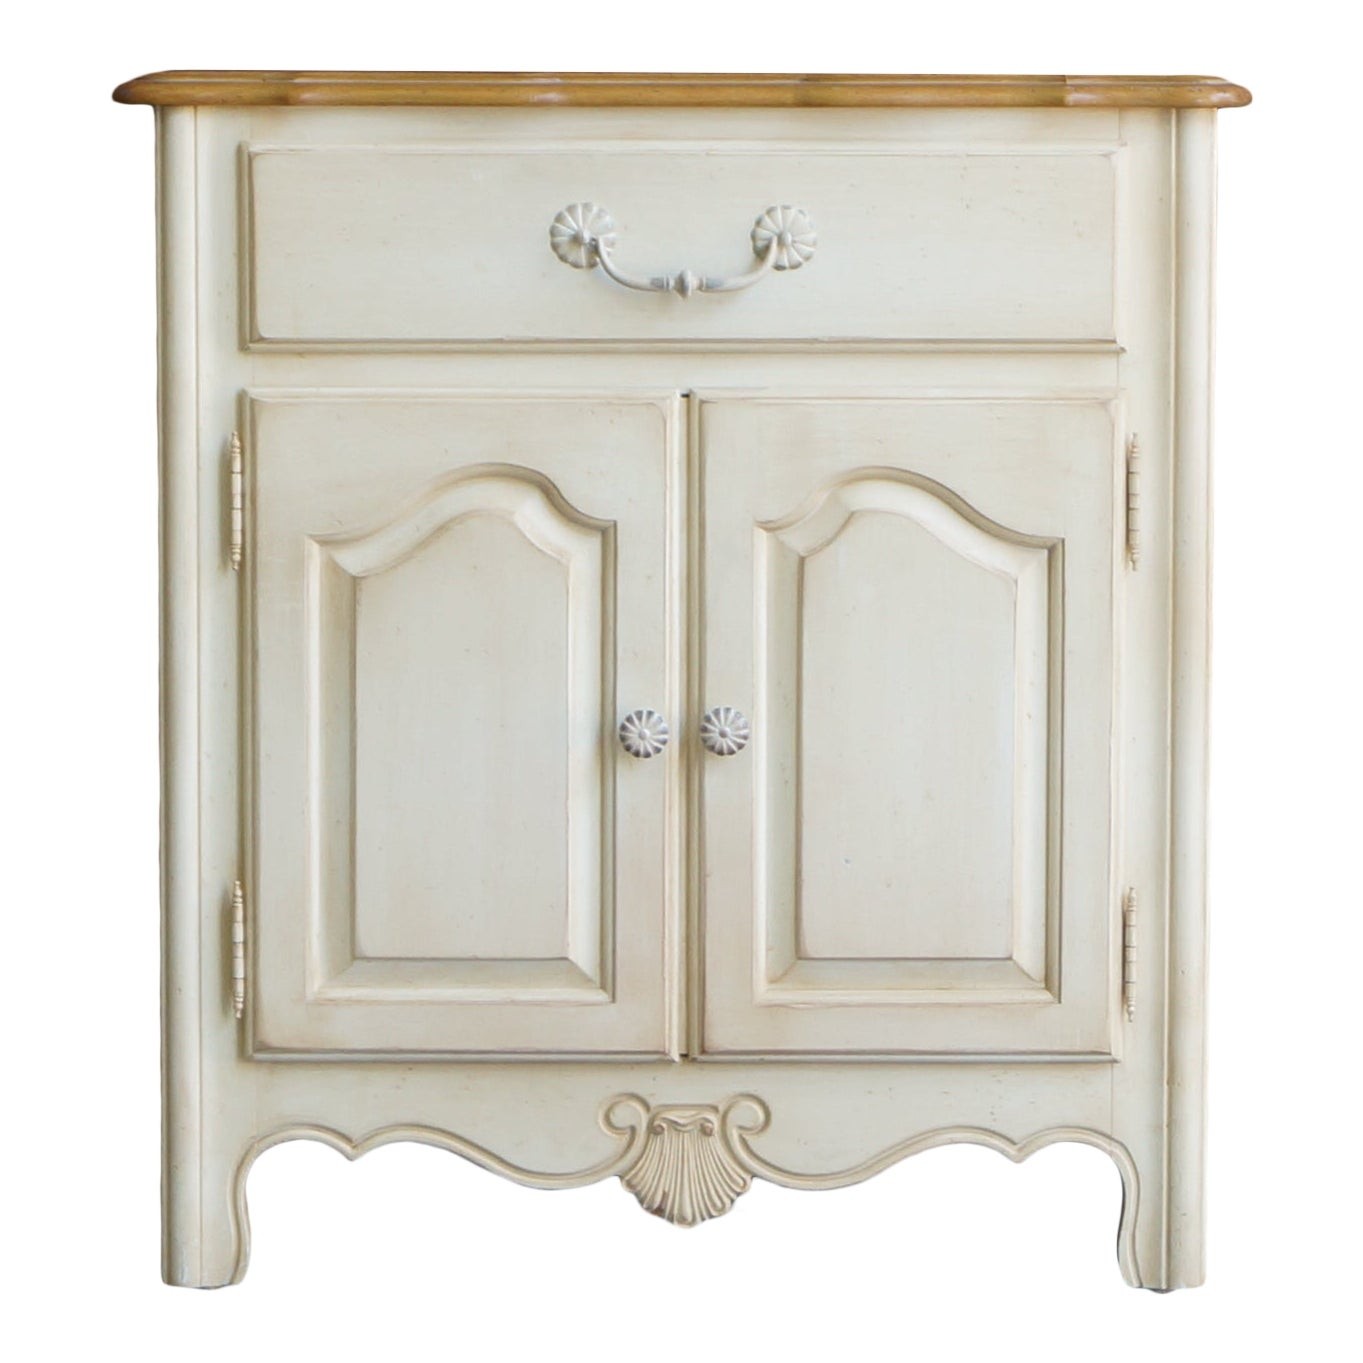 Ethan allen country french nightstand chairish